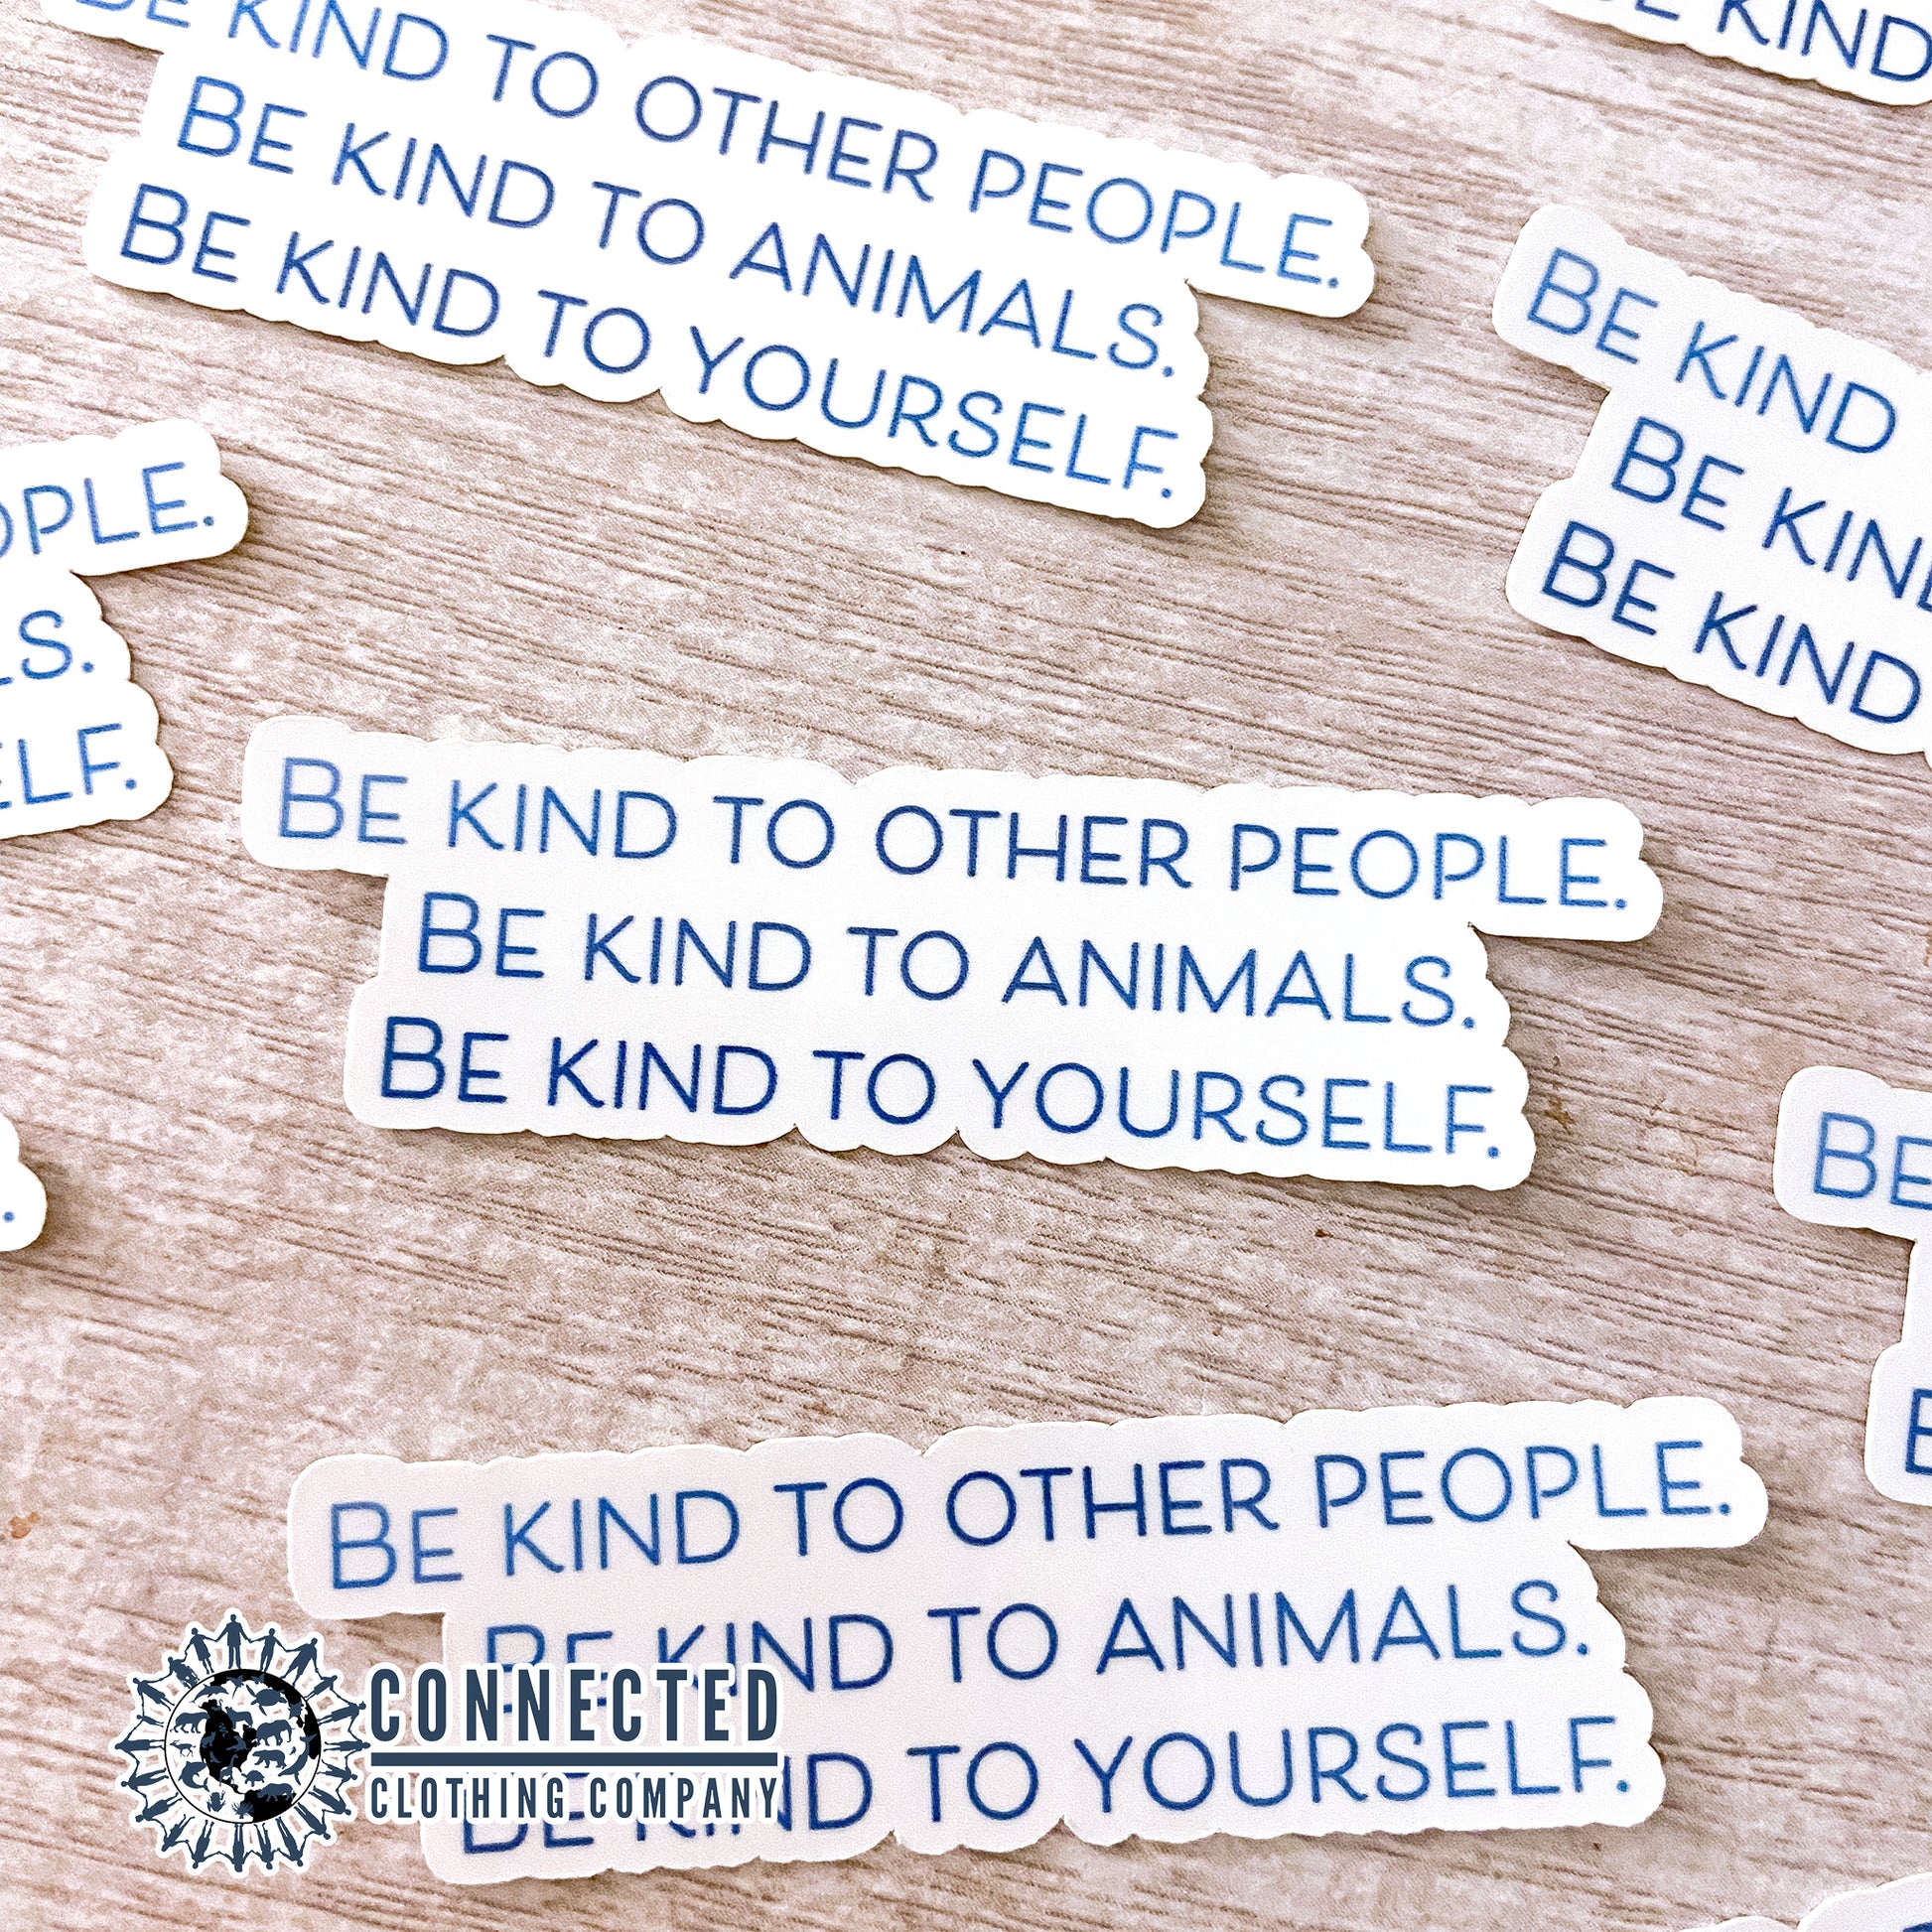 Be Kind To All Sticker - Connected Clothing Company - 10% of proceeds donated to ocean conservation